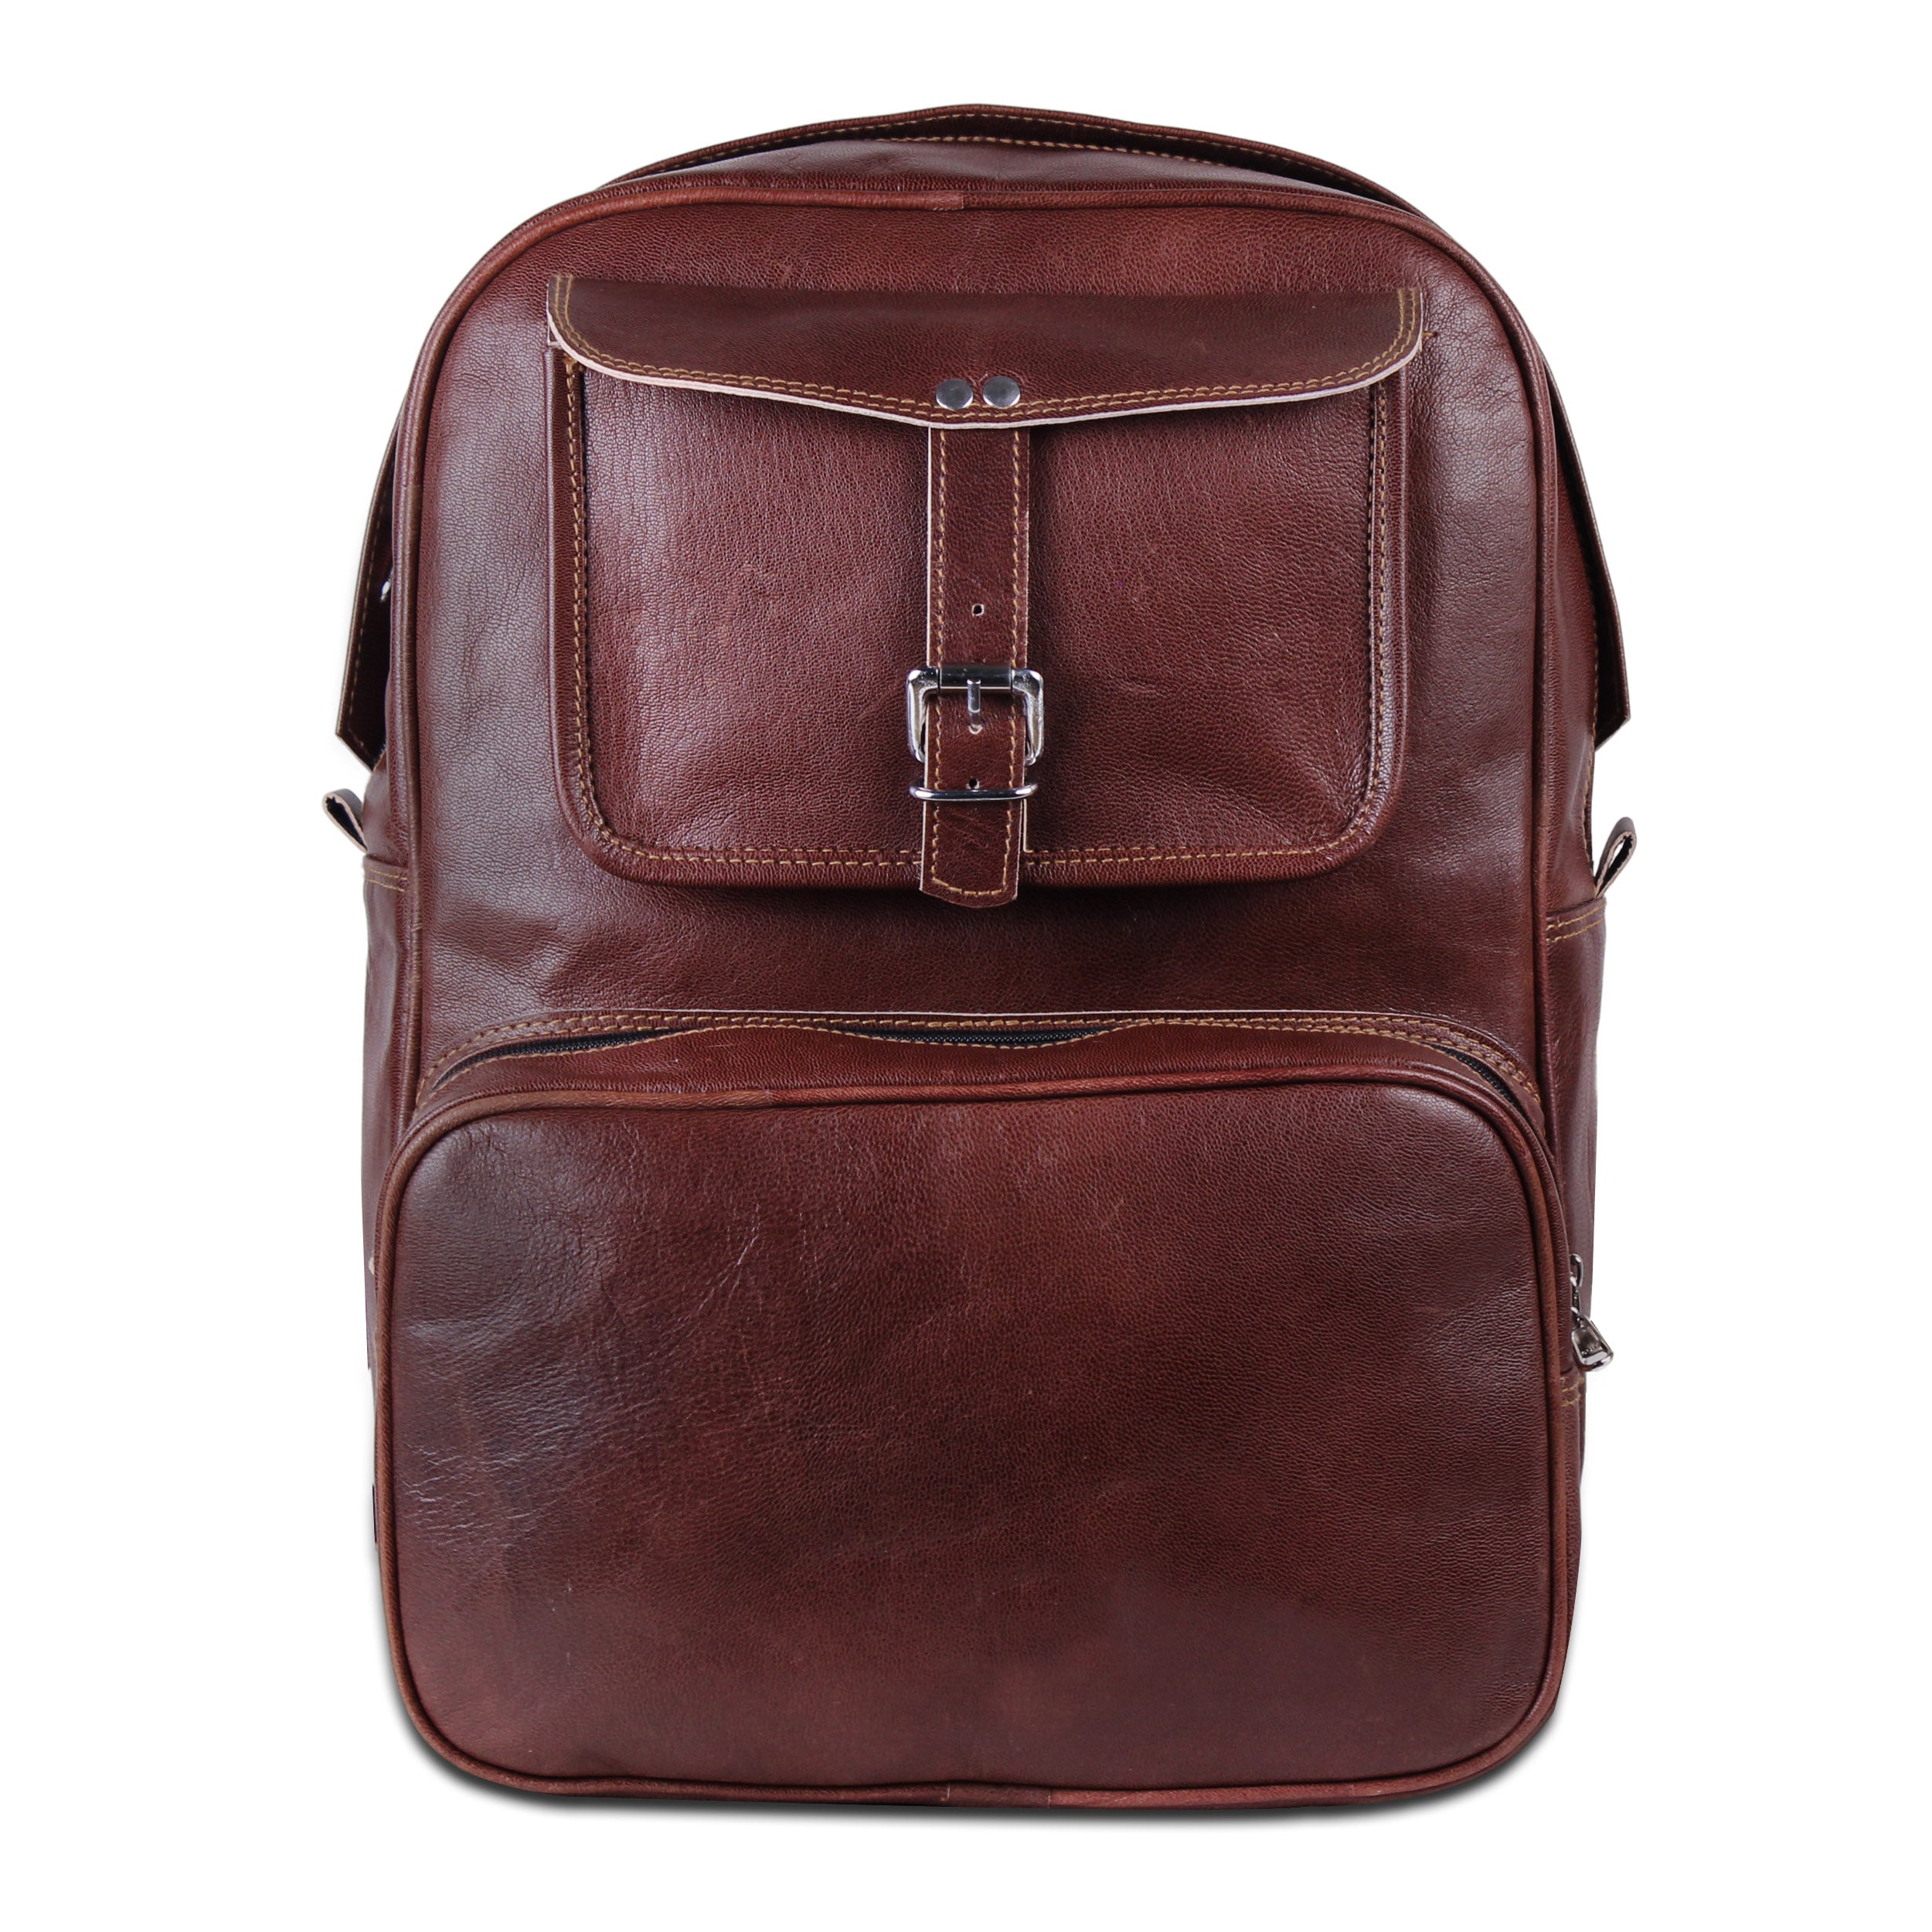 School Travel Leather Backpack